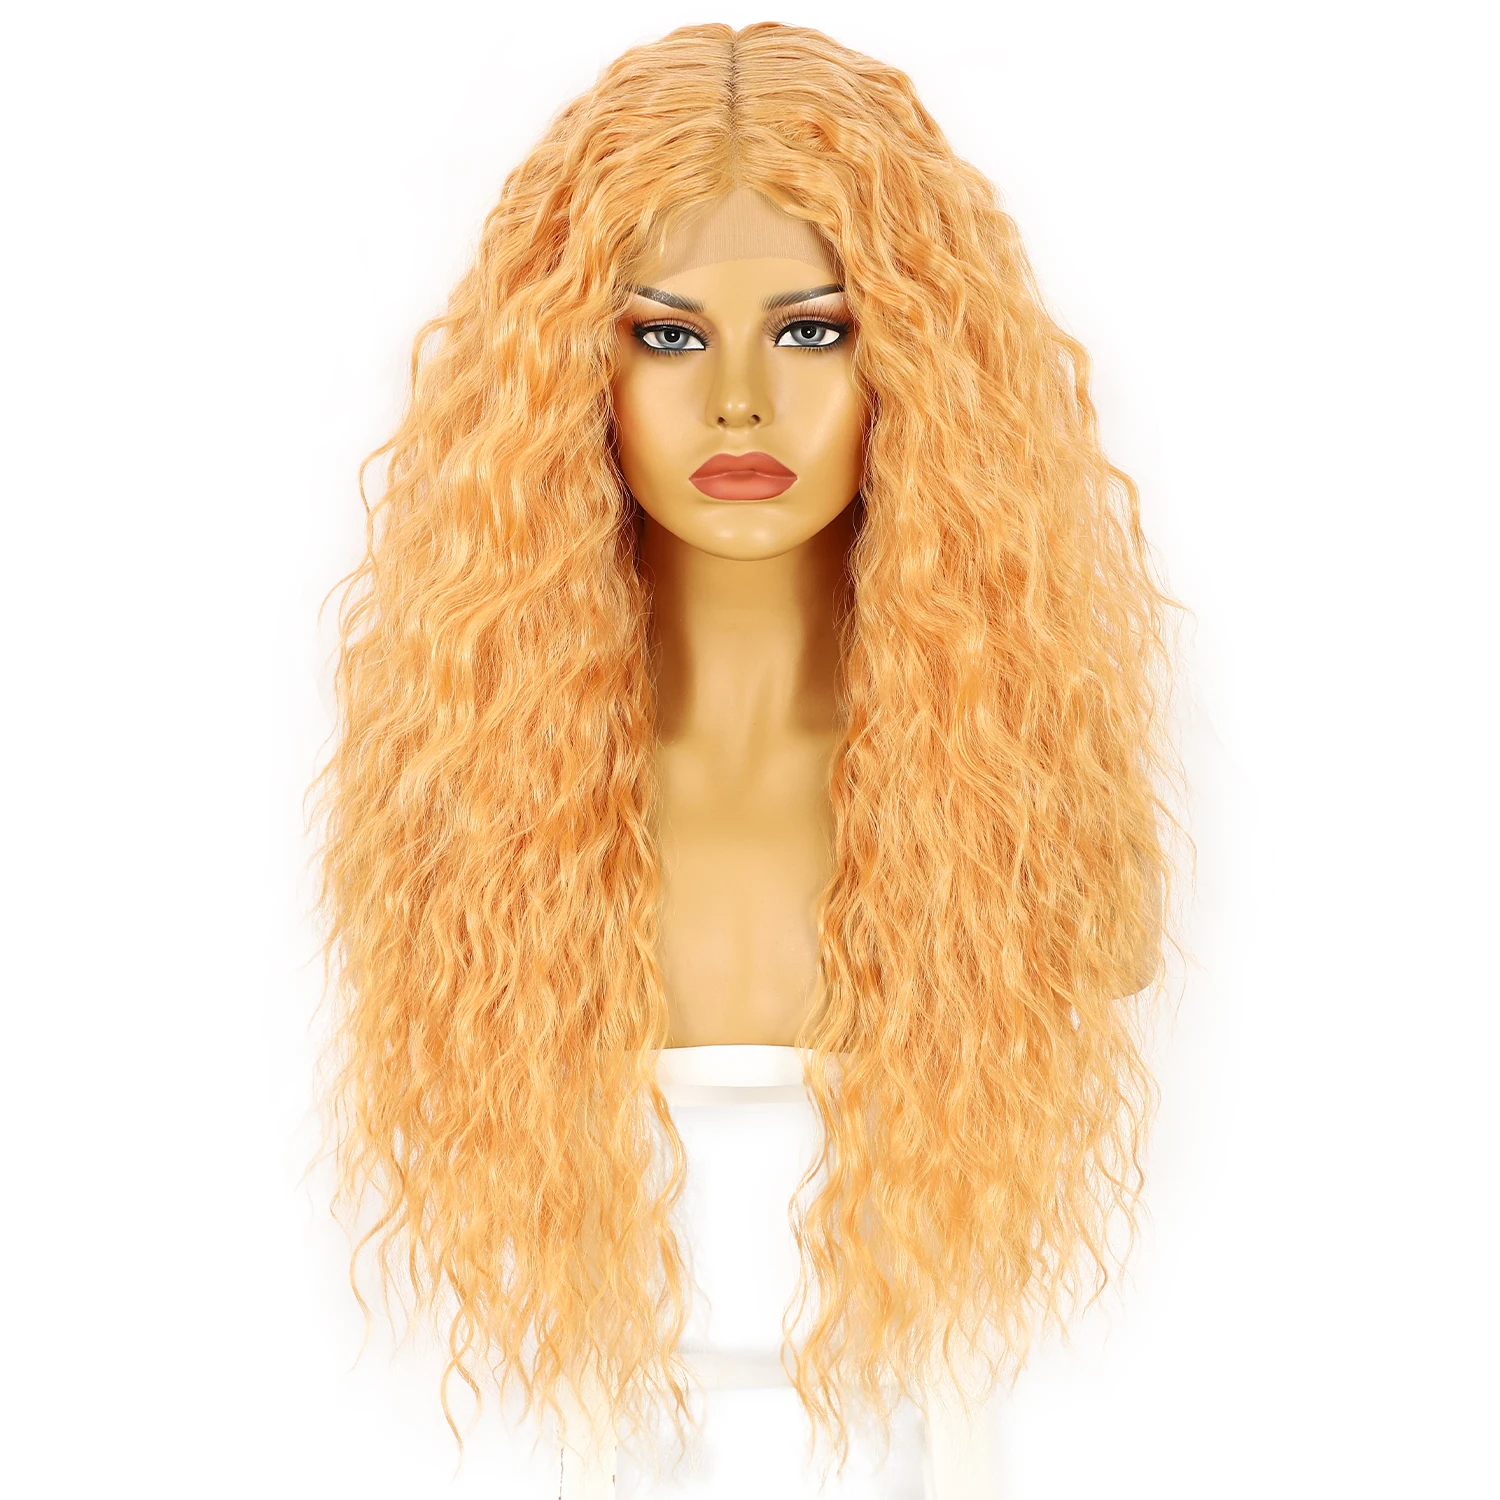 28 Inches 13x1 Lace Front Wigs Yellow Curly Heat Resistant Synthetic For Black Women Hollywood Party Costume Cosplay Wigs